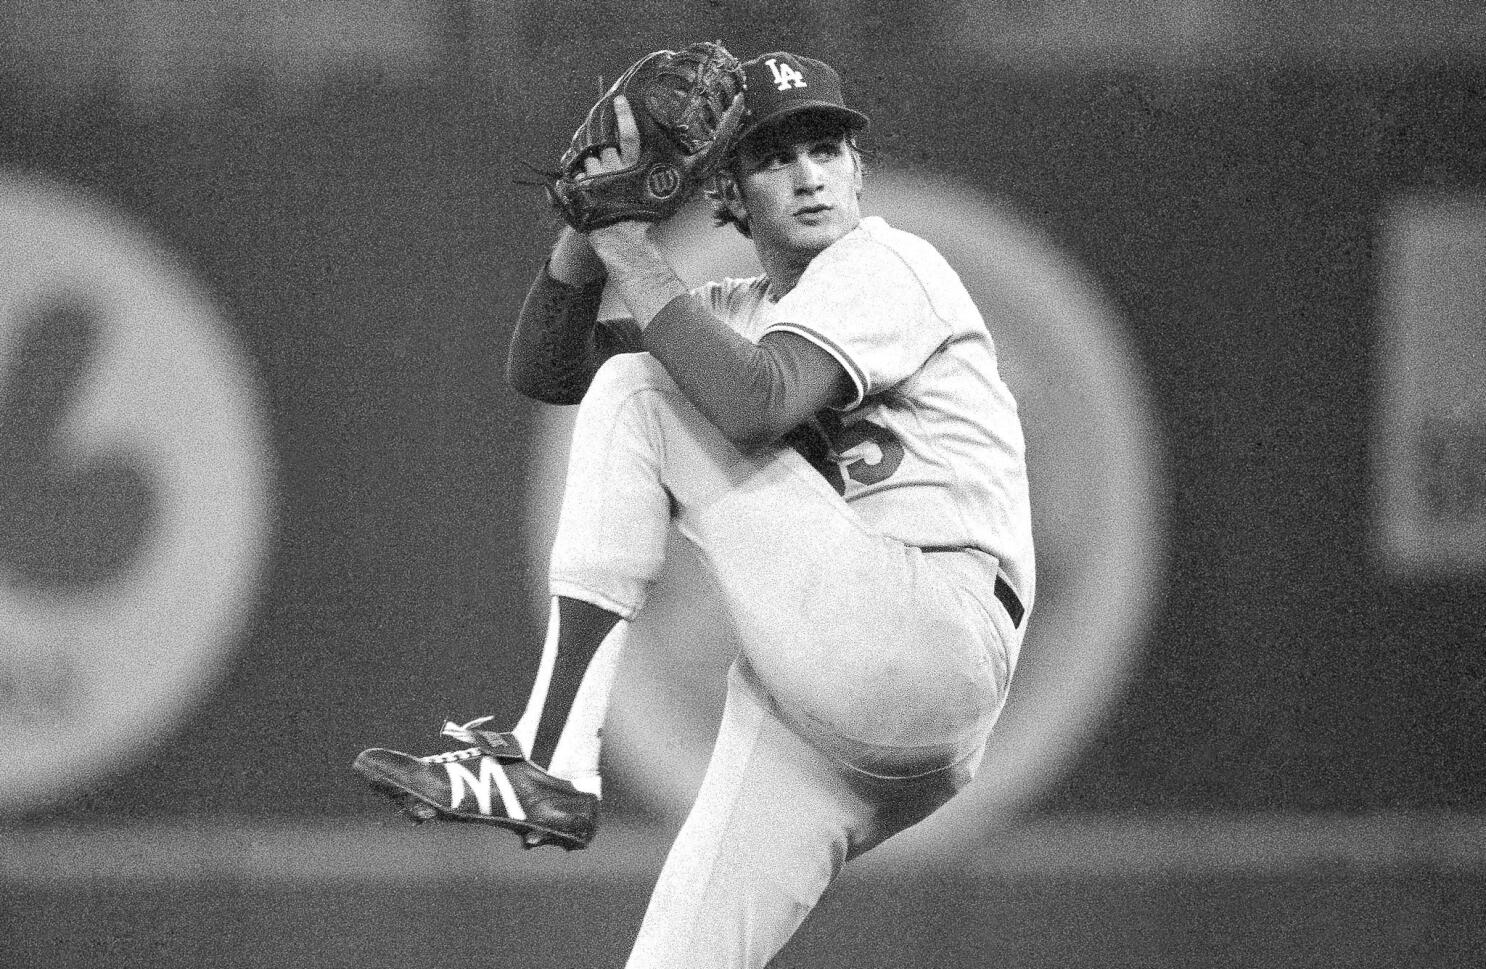 Bob Welch dies at 57; faced Reggie Jackson in classic World Series duel -  Los Angeles Times